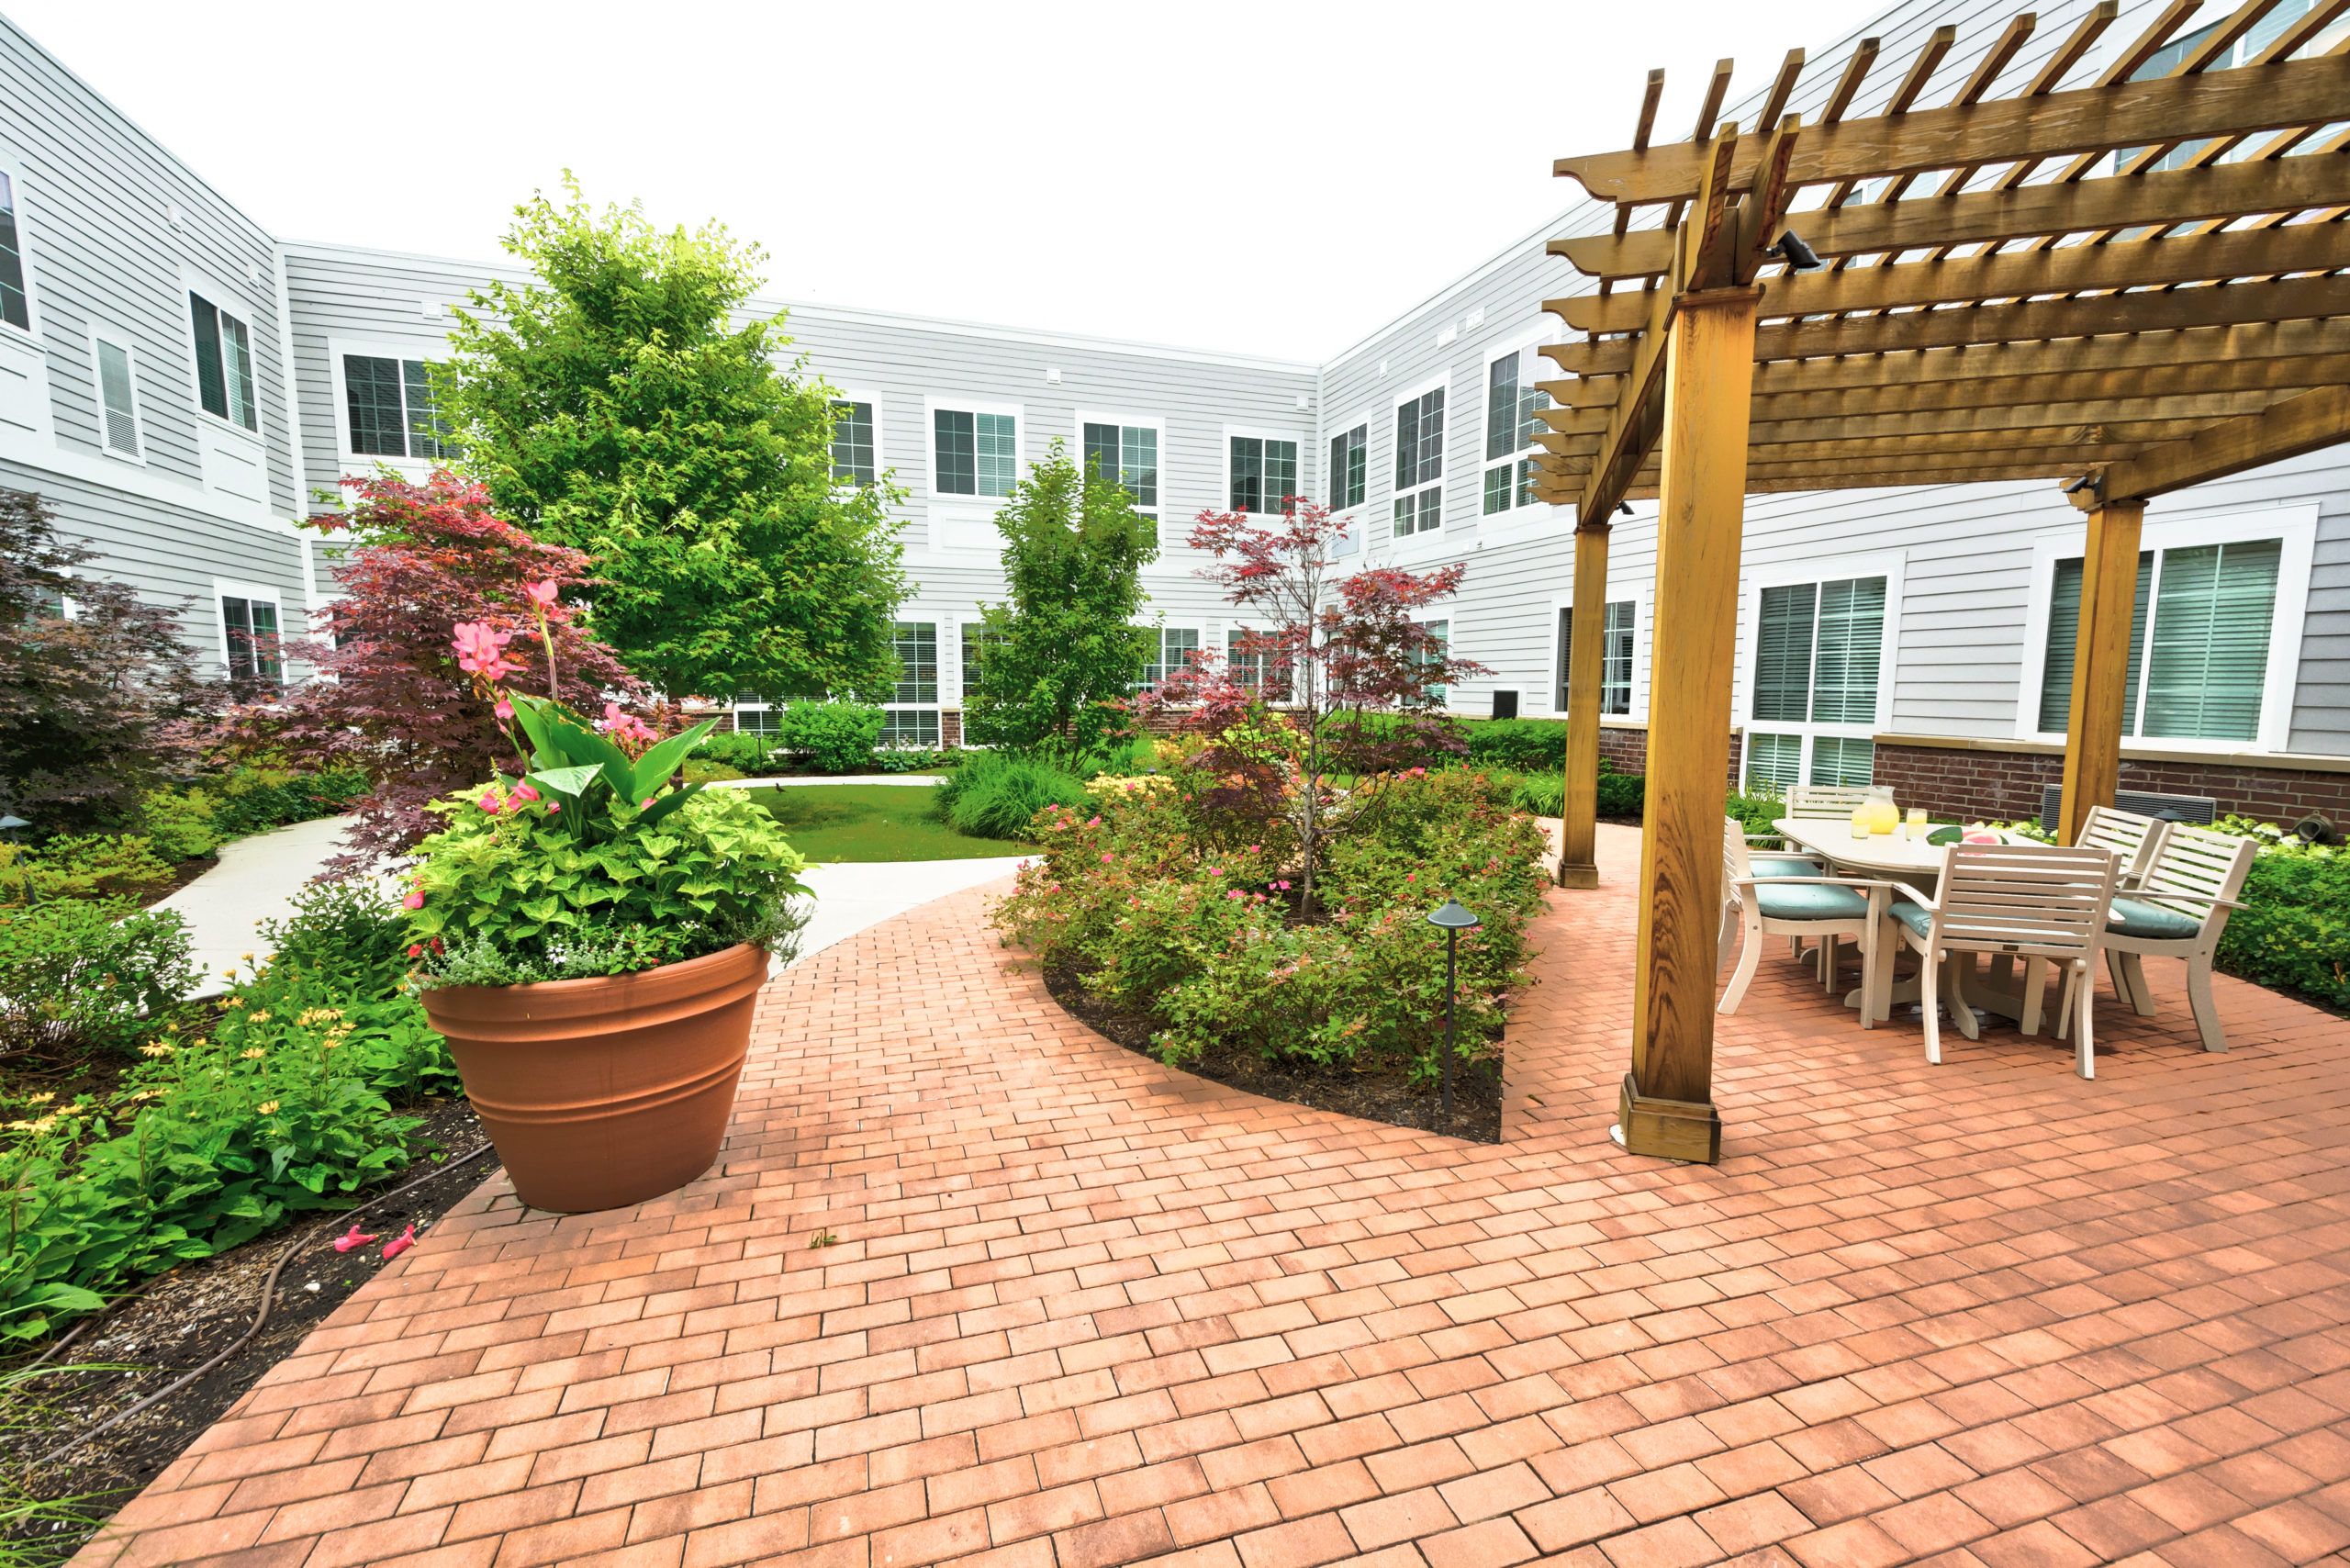 Palos Heights Senior Living community featuring lush gardens, patio seating, and beautiful architecture.